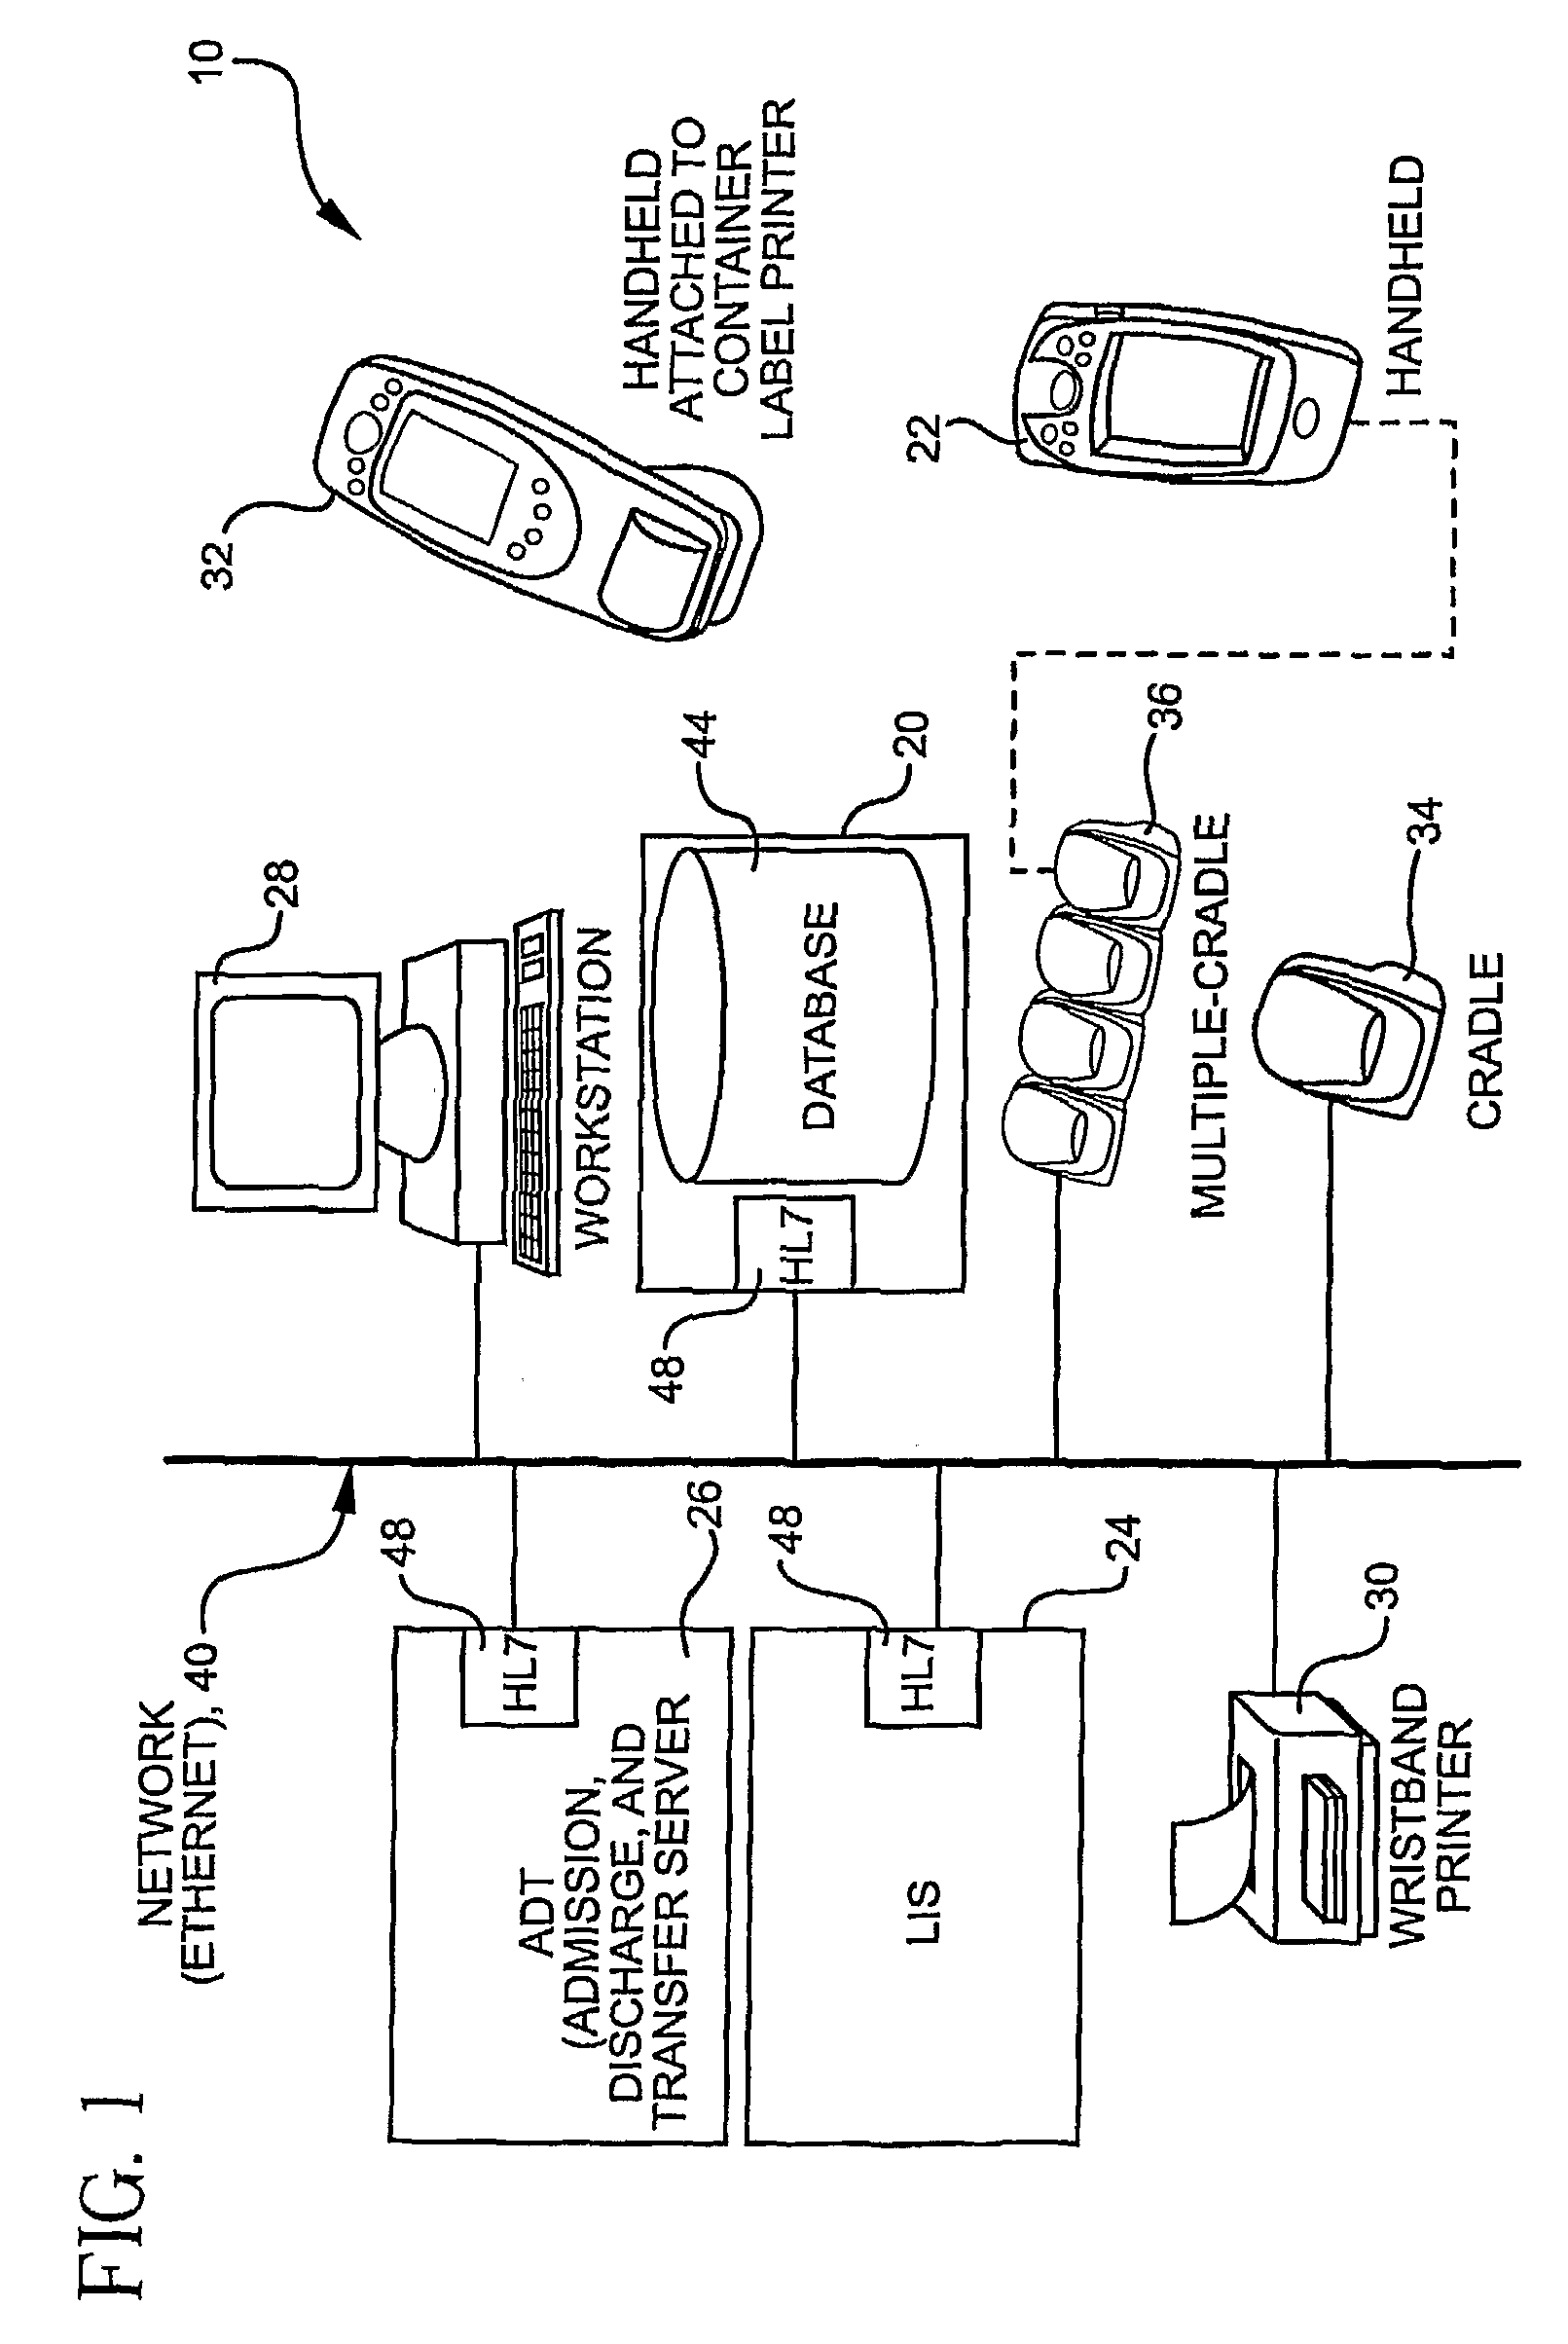 Method and System for Monitoring Medical Treatment